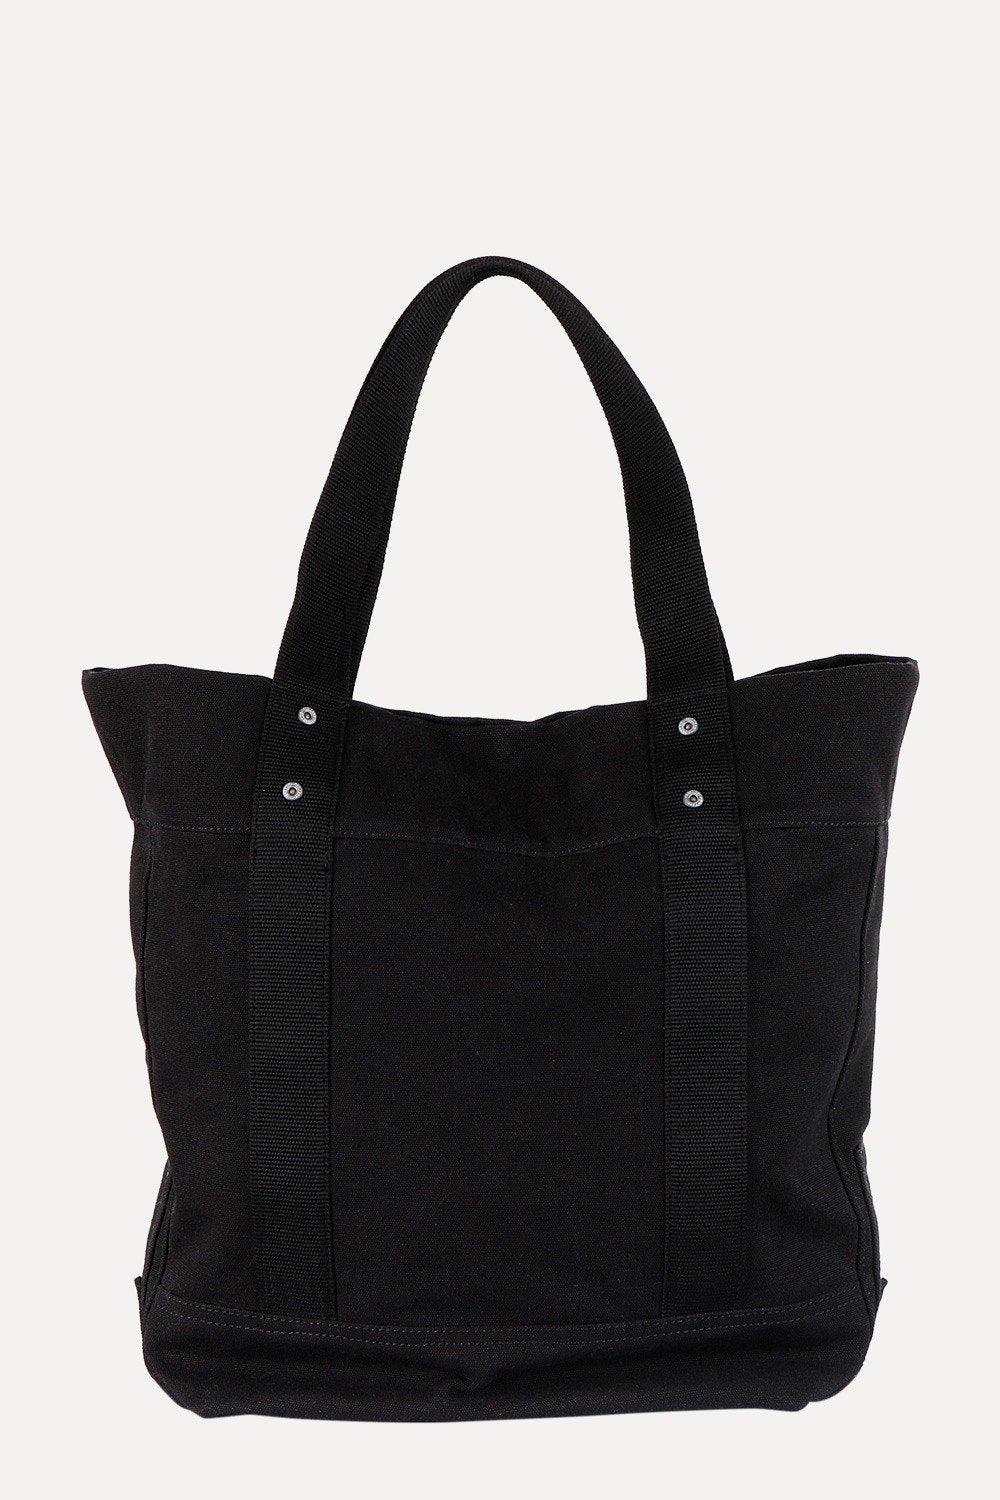 Bags Tagged "Pattern_Throw In Black Canvas Tote Bag" Zobello